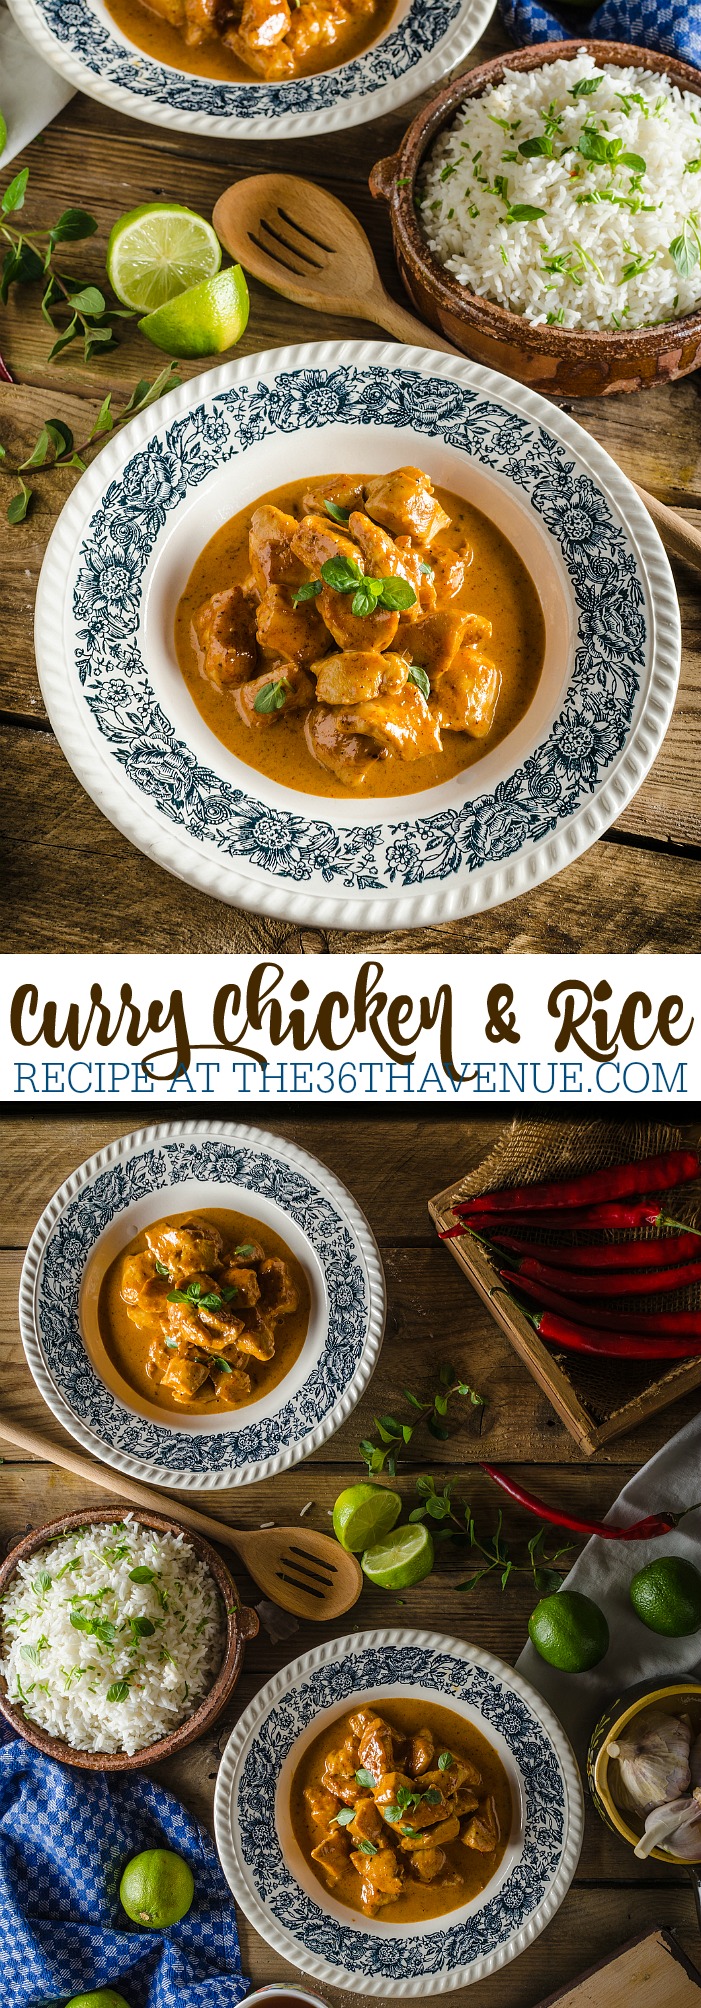 Curry Chicken Recipe - This chicken recipe is super tasty and delicious. Pin it now and make it later!